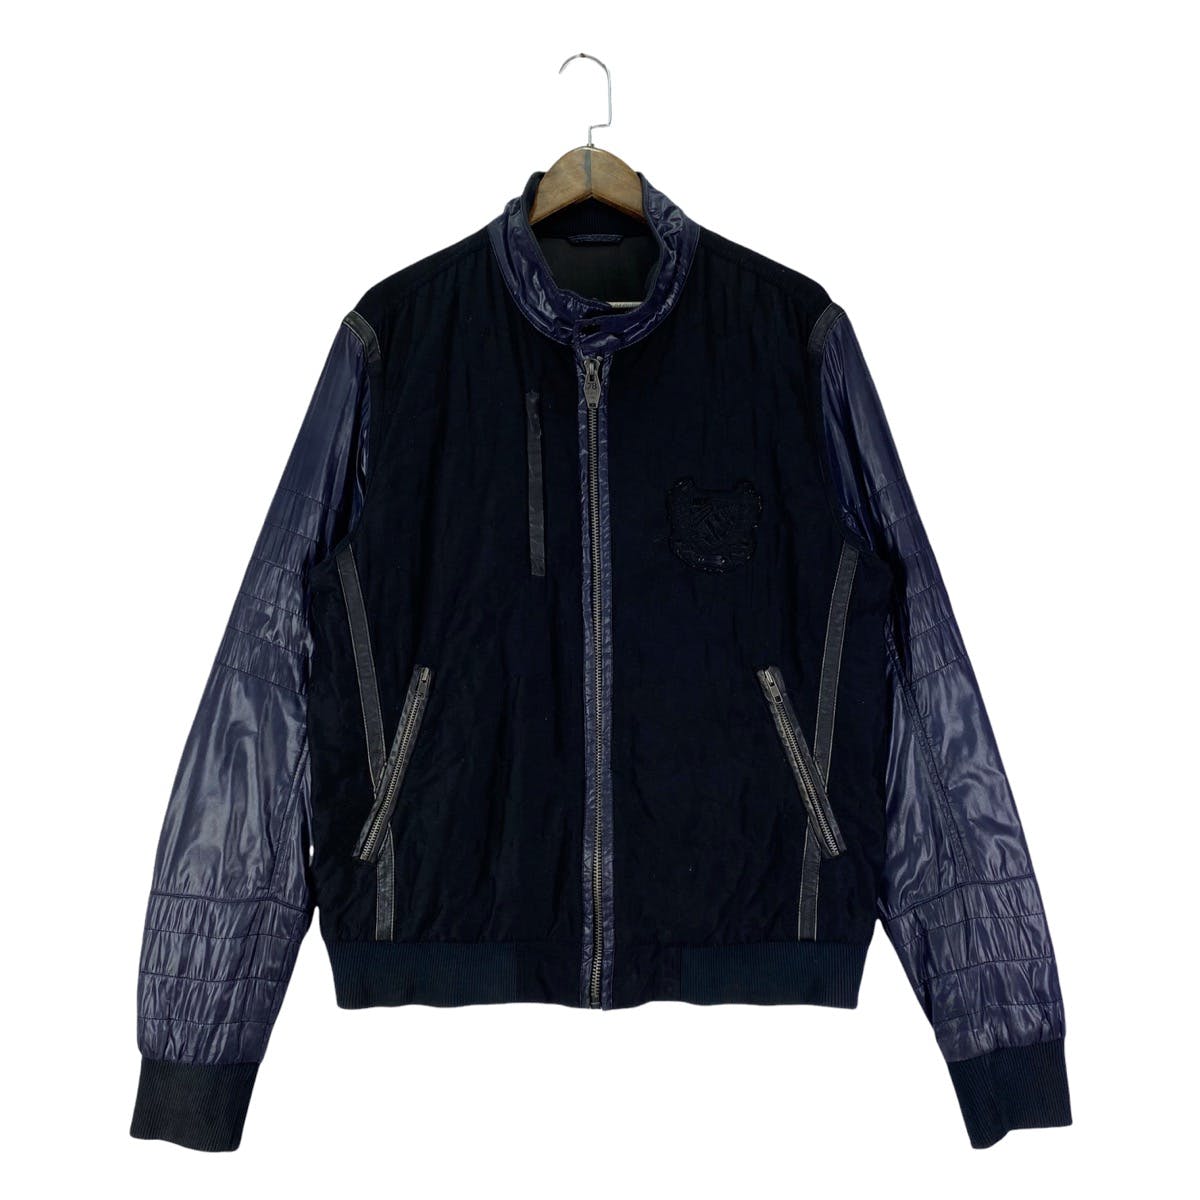 Diesel Honeycomb Quilted Bomber Jacket - 6